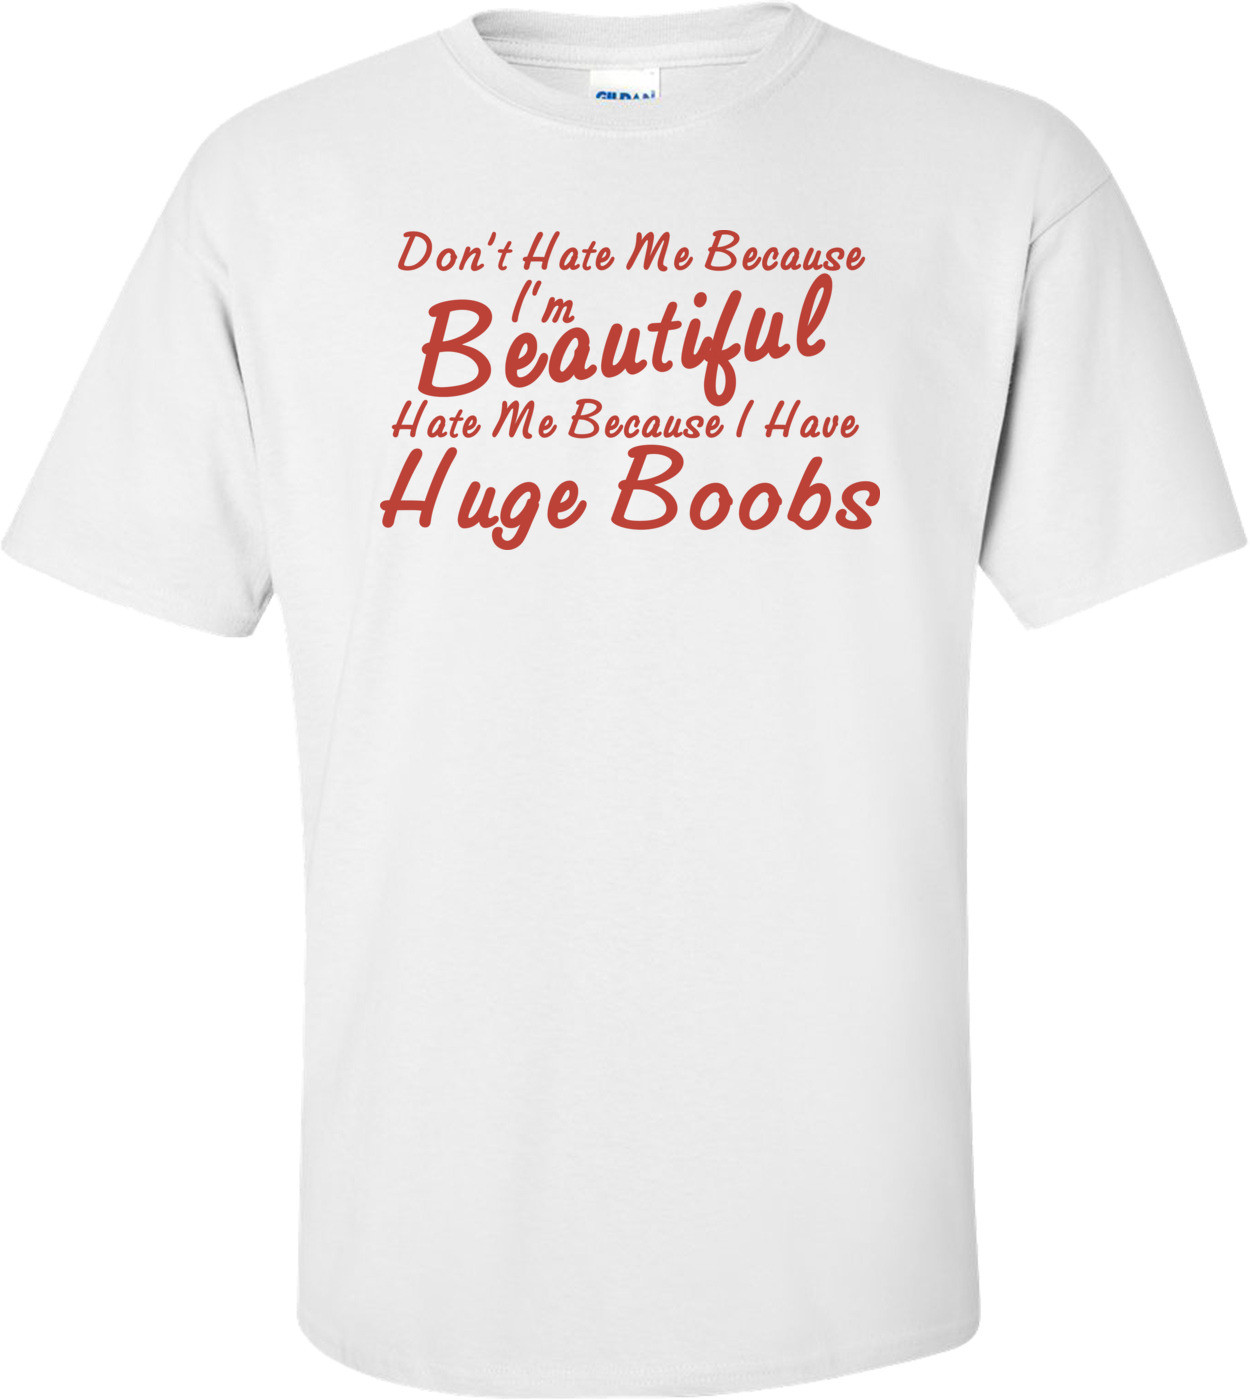 Don't Hate Me Because I'm Beautiful Hate Me Because I Have Huge Boobs T-shirt